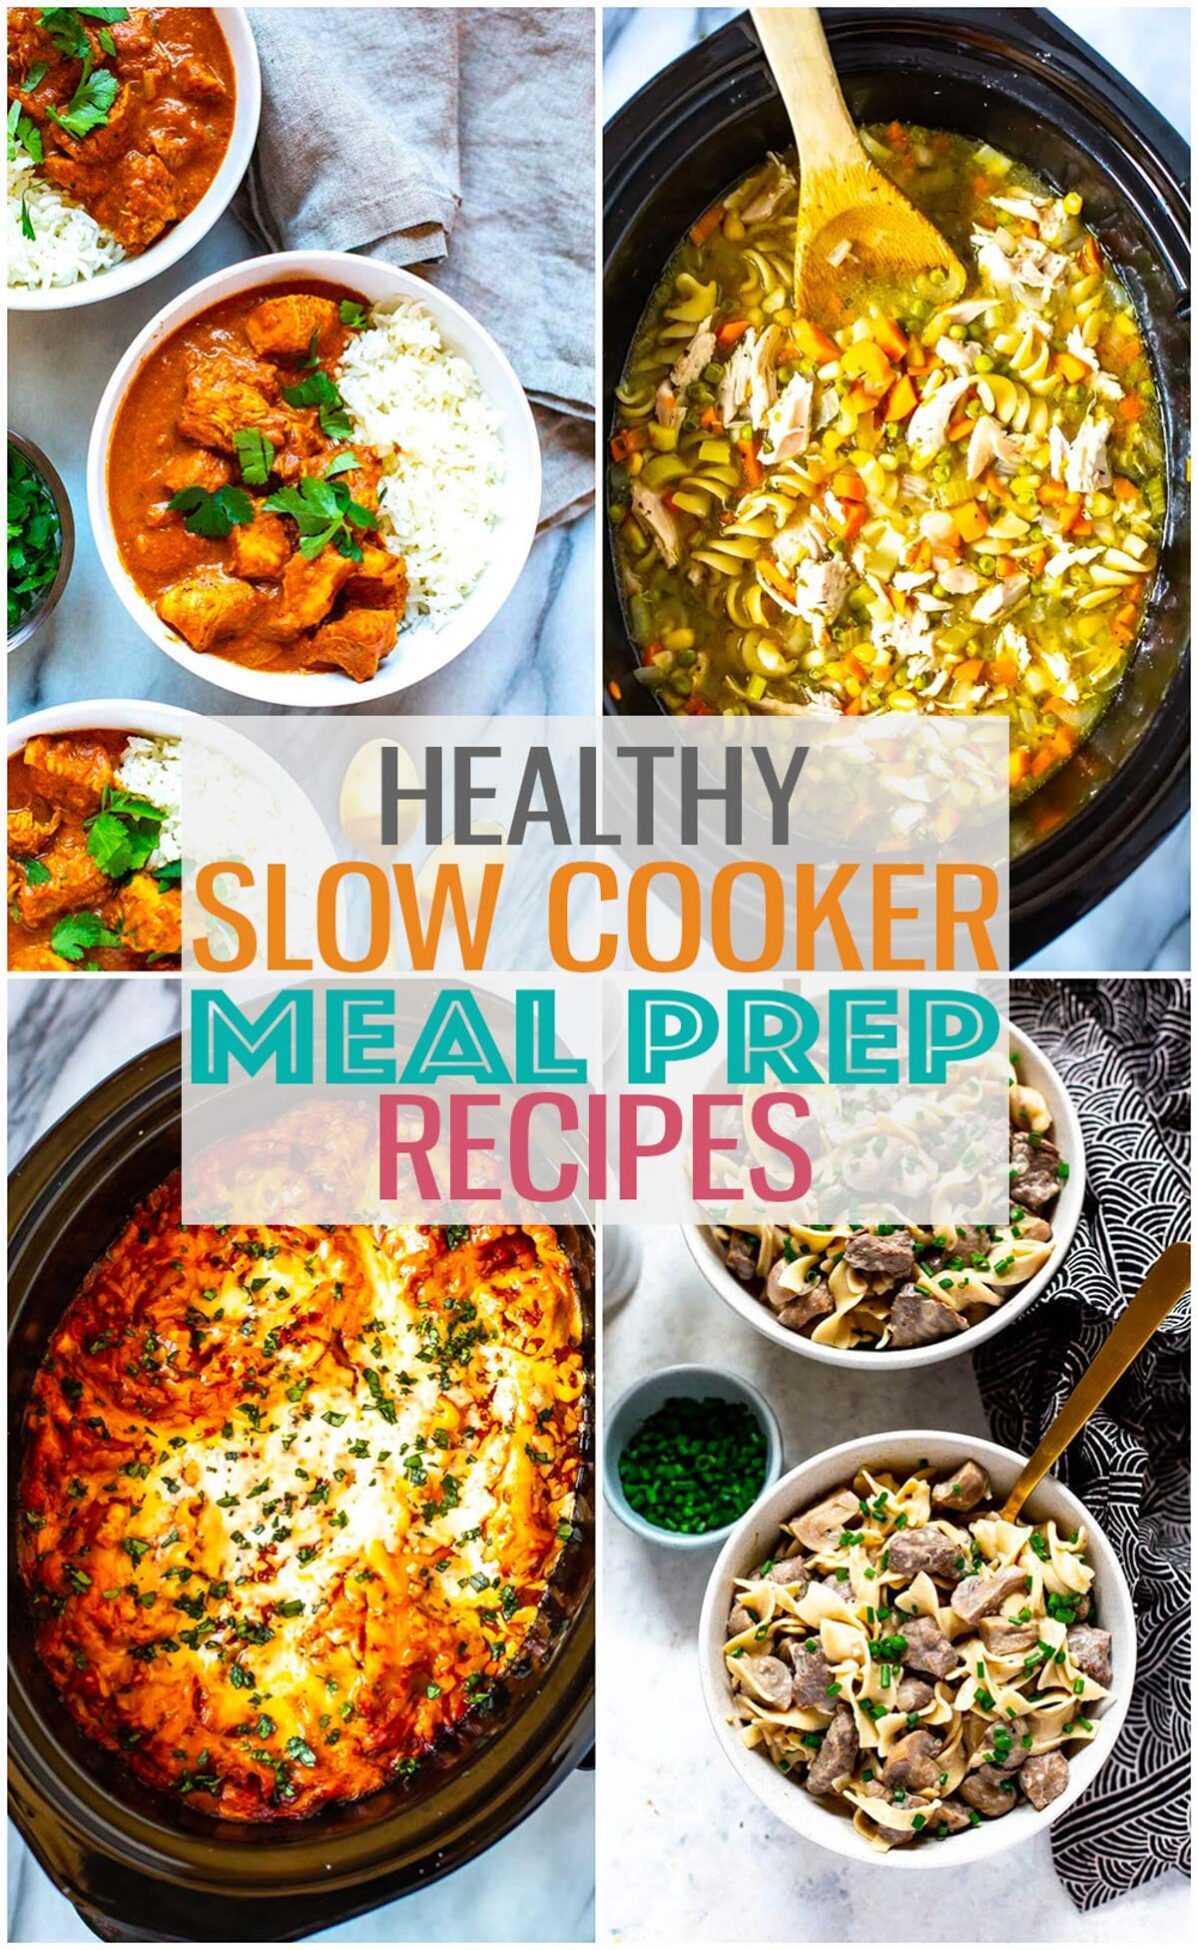 A collage of four different crockpot recipes with the text "Healthy Slow Cooker Meal Prep Recipes" layered over top.